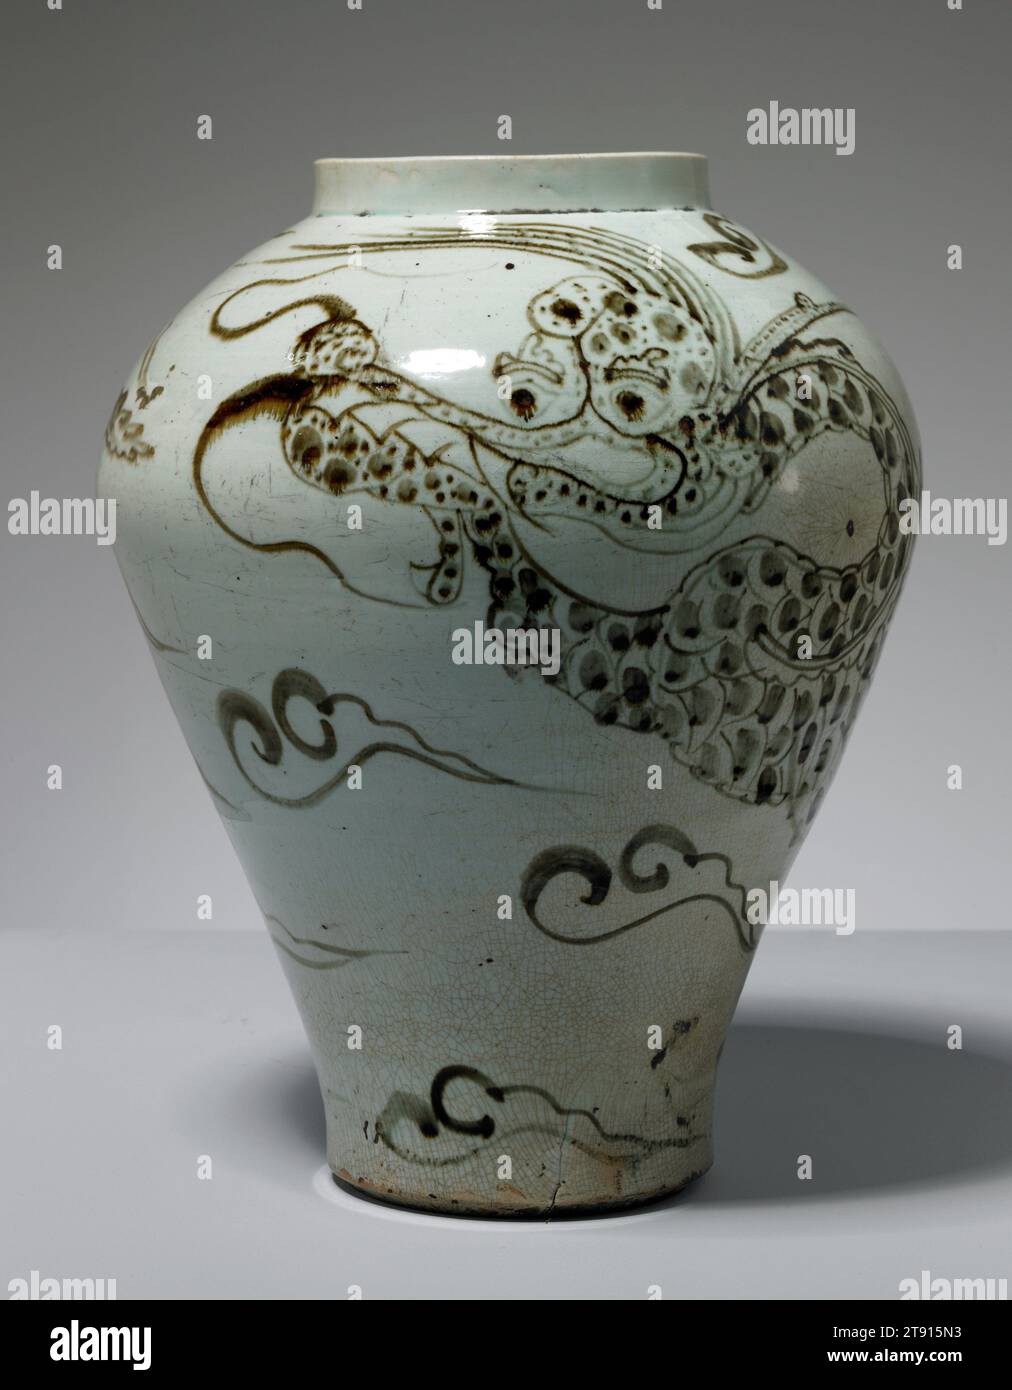 Jar with Dragon and Clouds, 17th century, Unknown Korean, 16 1/4 in. (41.28 cm), White porcelain with underglaze iron-brown, Korea, 17th century, In addition to designs painted in cobalt blue, Korean potters between the 1600s and 1800s produced many porcelain objects decorated with underglaze iron brown-designs. Possibly because cobalt was an expensive material, blue-and-white vessels tend to be carefully painted. In contrast, Korean potters display a remarkable freedom in their iron-brown designs. Here, a dragon with a humorously long snout coils around the swelling sides of this robust jar Stock Photo